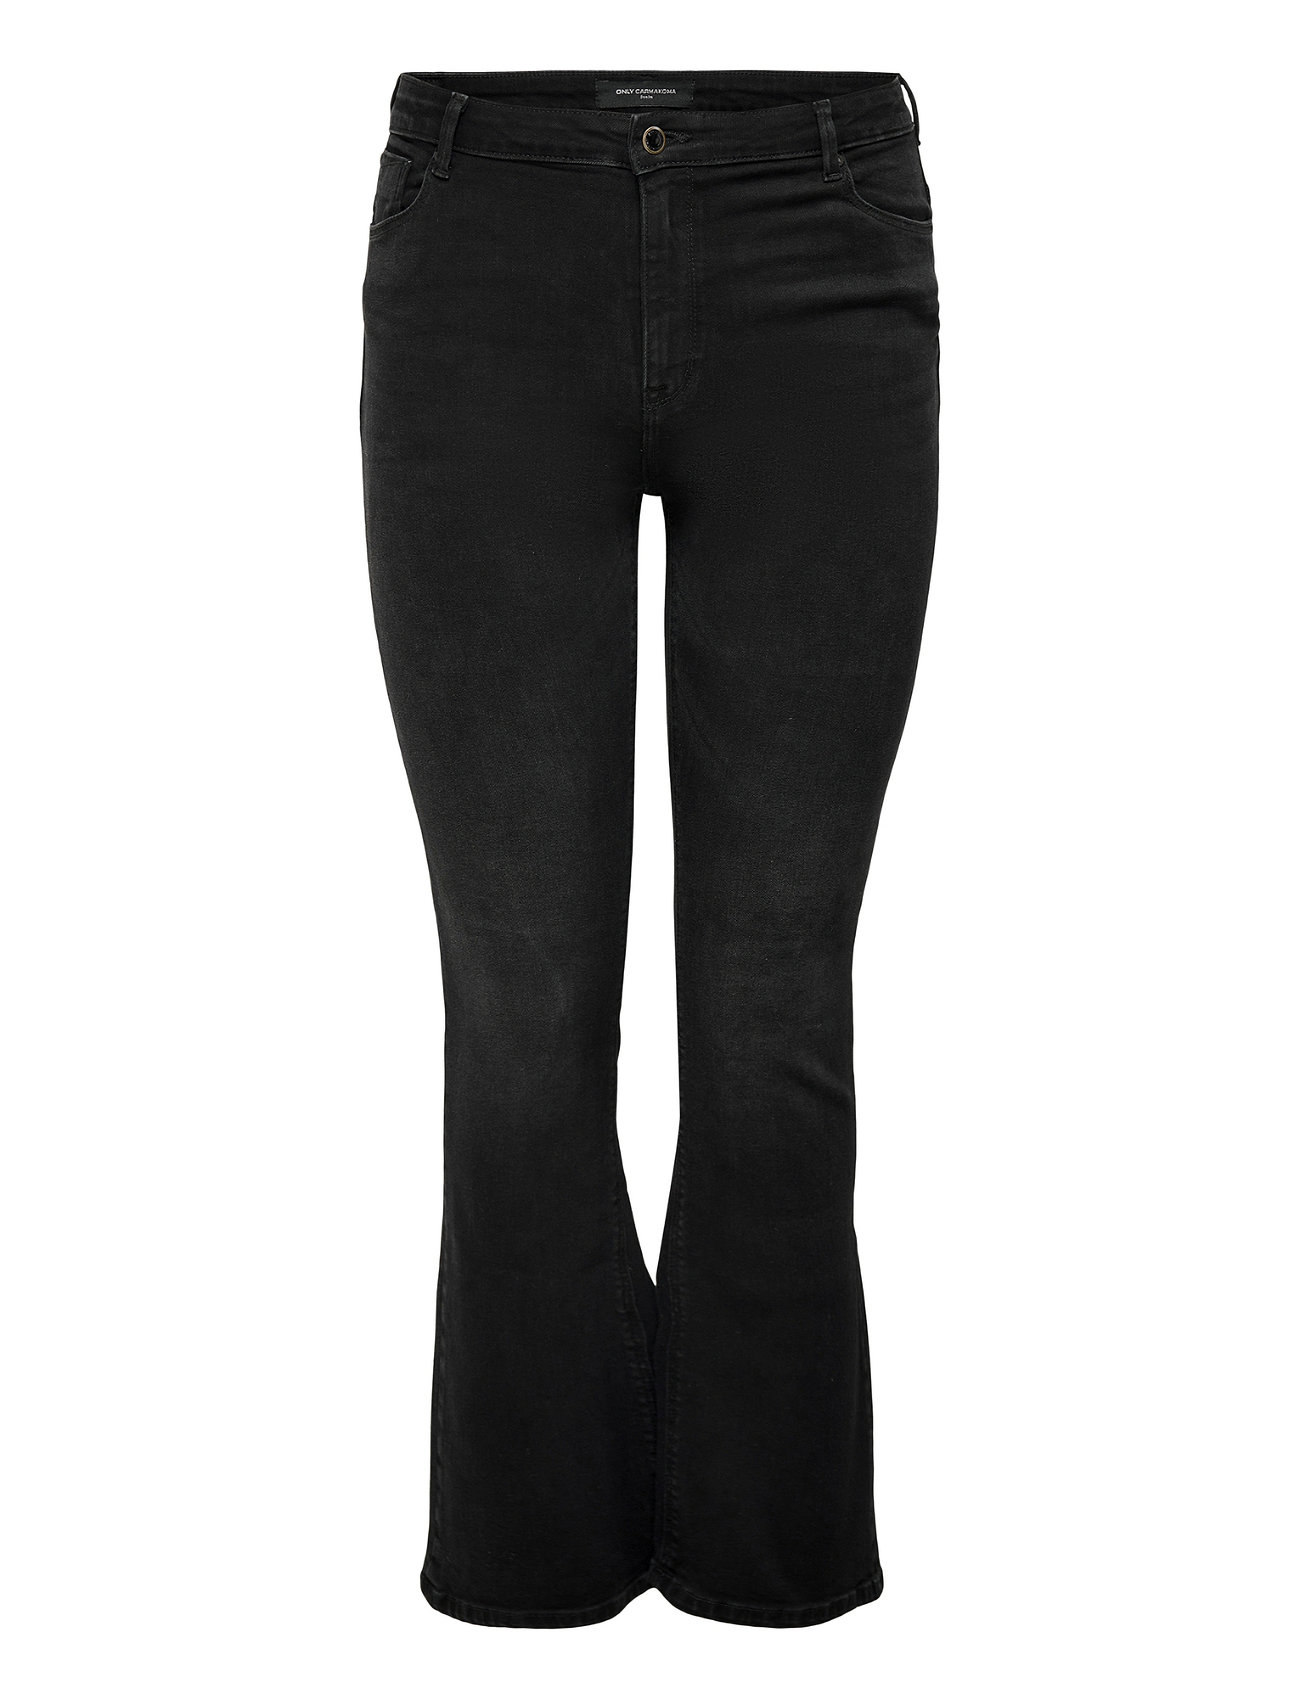 ONLY Carmakoma Carsally Hw Flared Jeans Bj165 - Straight jeans - Boozt.com